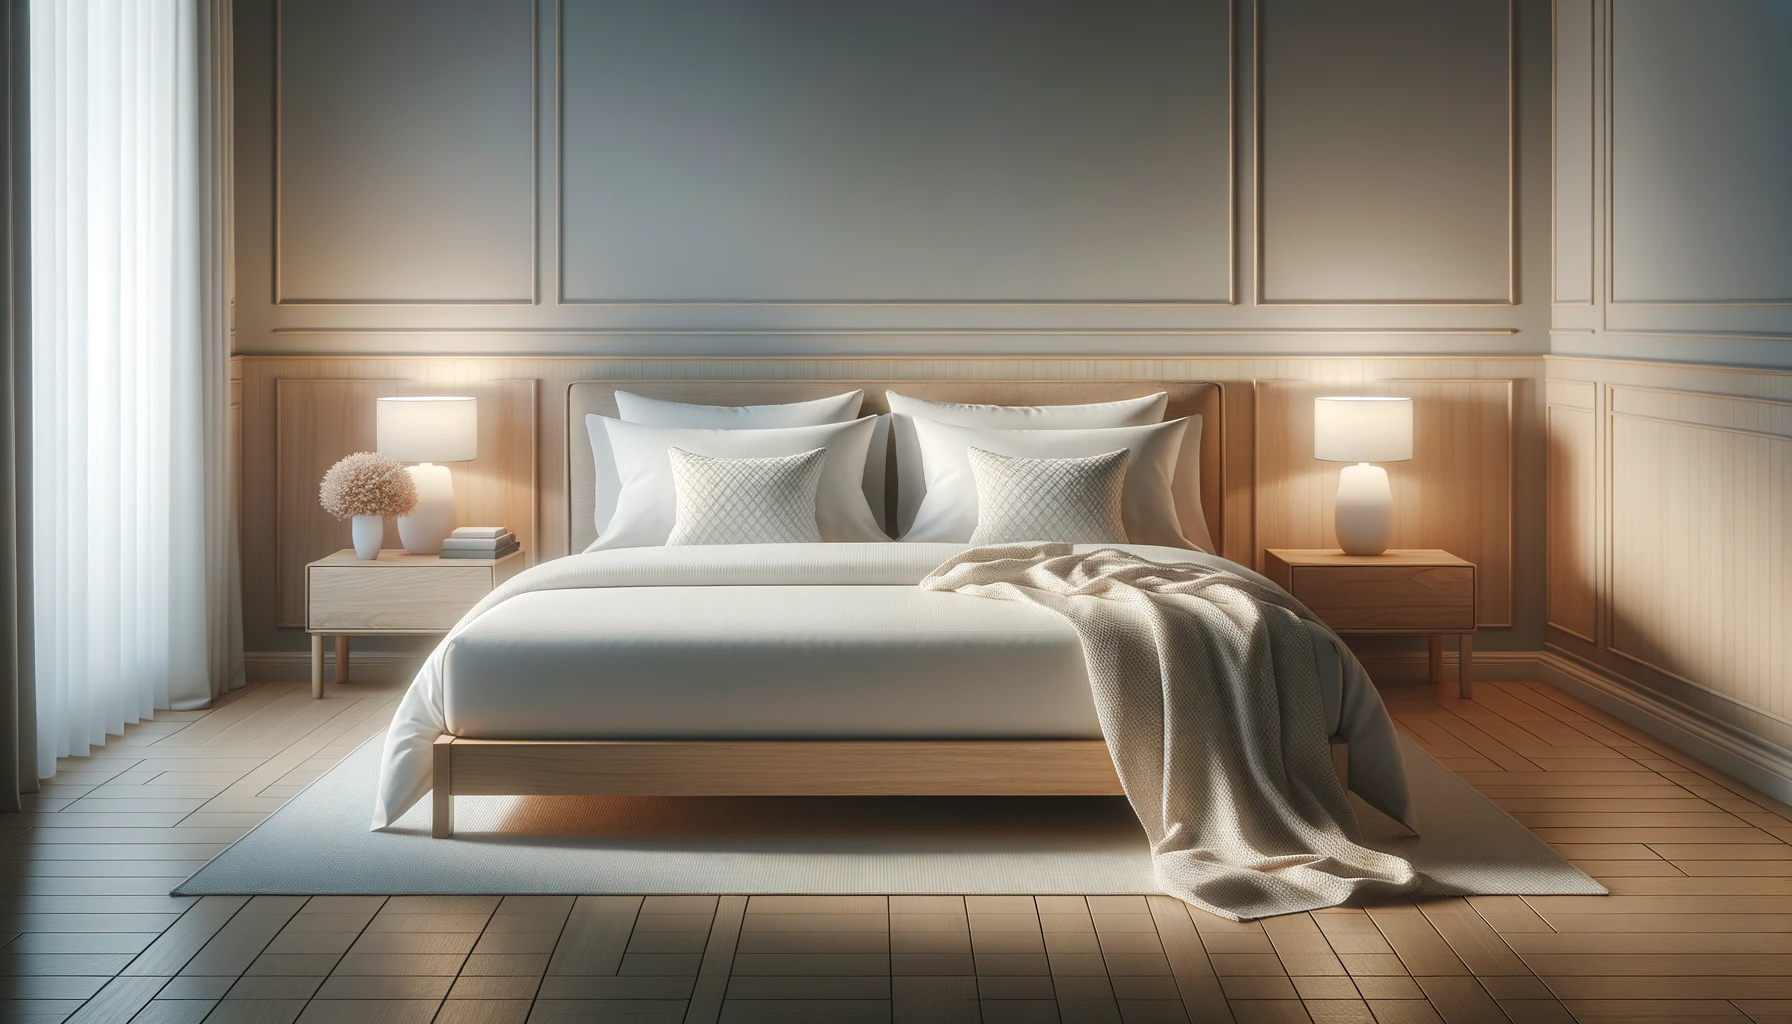 16:9 vector image illustrating a serene bedroom with a perfectly sized mattress on a wooden bed frame, adorned with soft pillows and a cozy blanket. The room has subtle ambient lighting, casting a gentle glow, emphasizing the comfort and tranquility of the space.